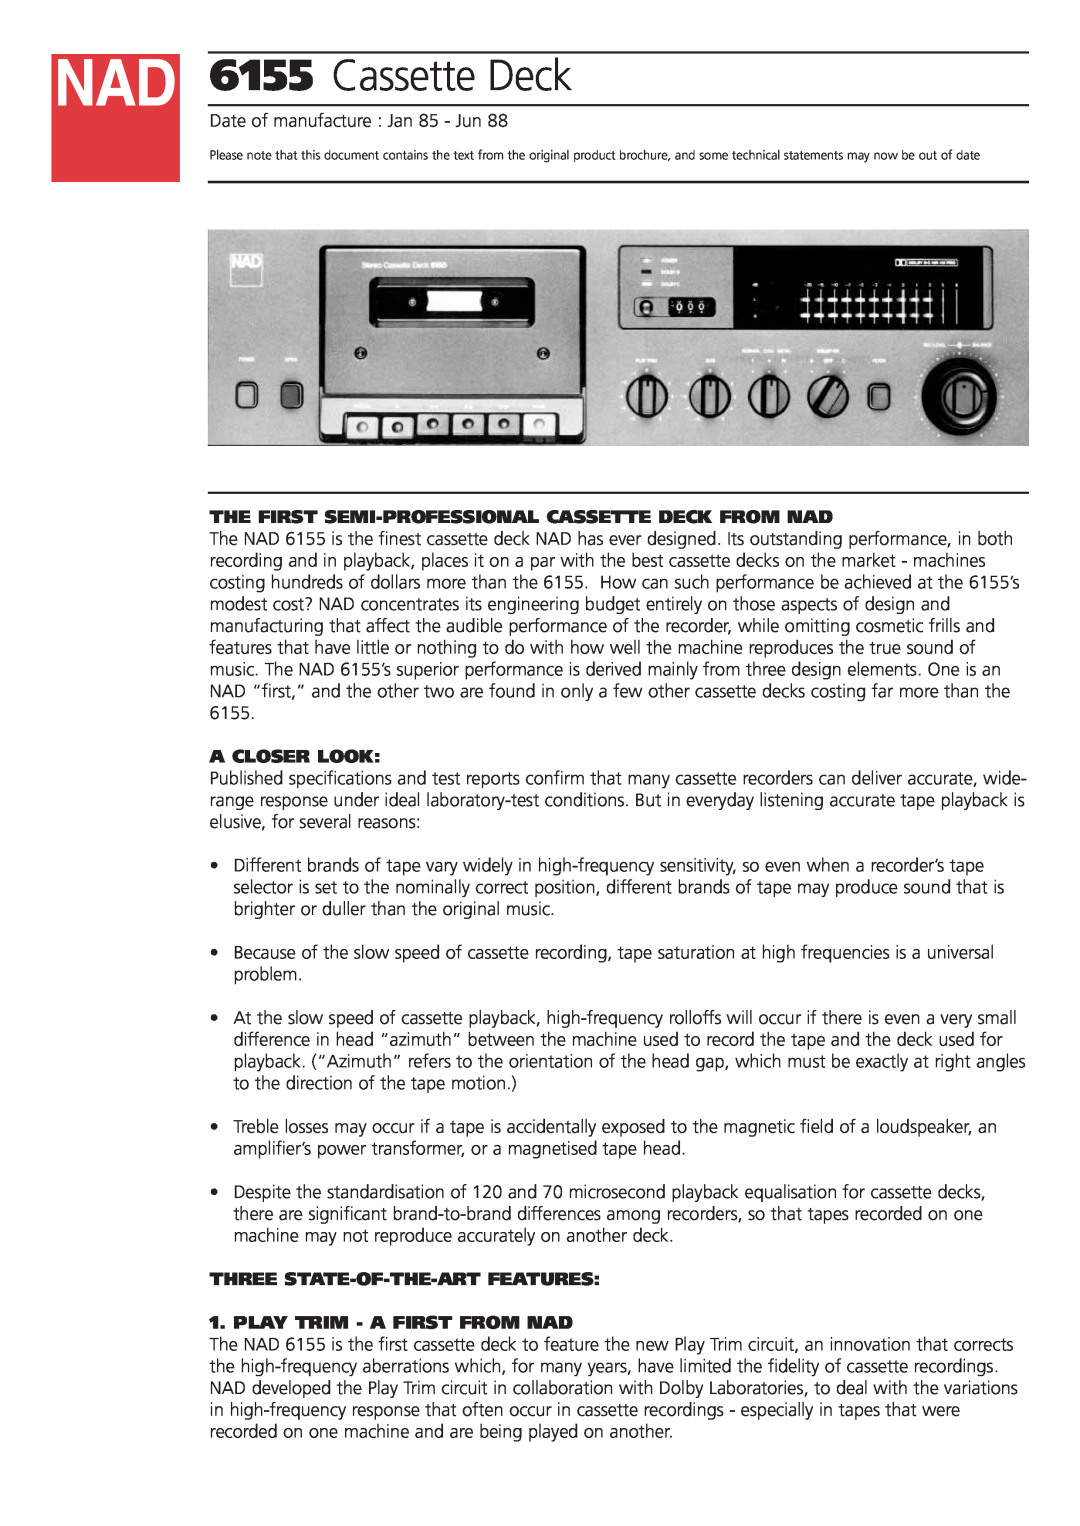 NAD 6155 brochure The First Semi-Professionalcassette Deck From Nad, A Closer Look, Three State-Of-The-Artfeatures 